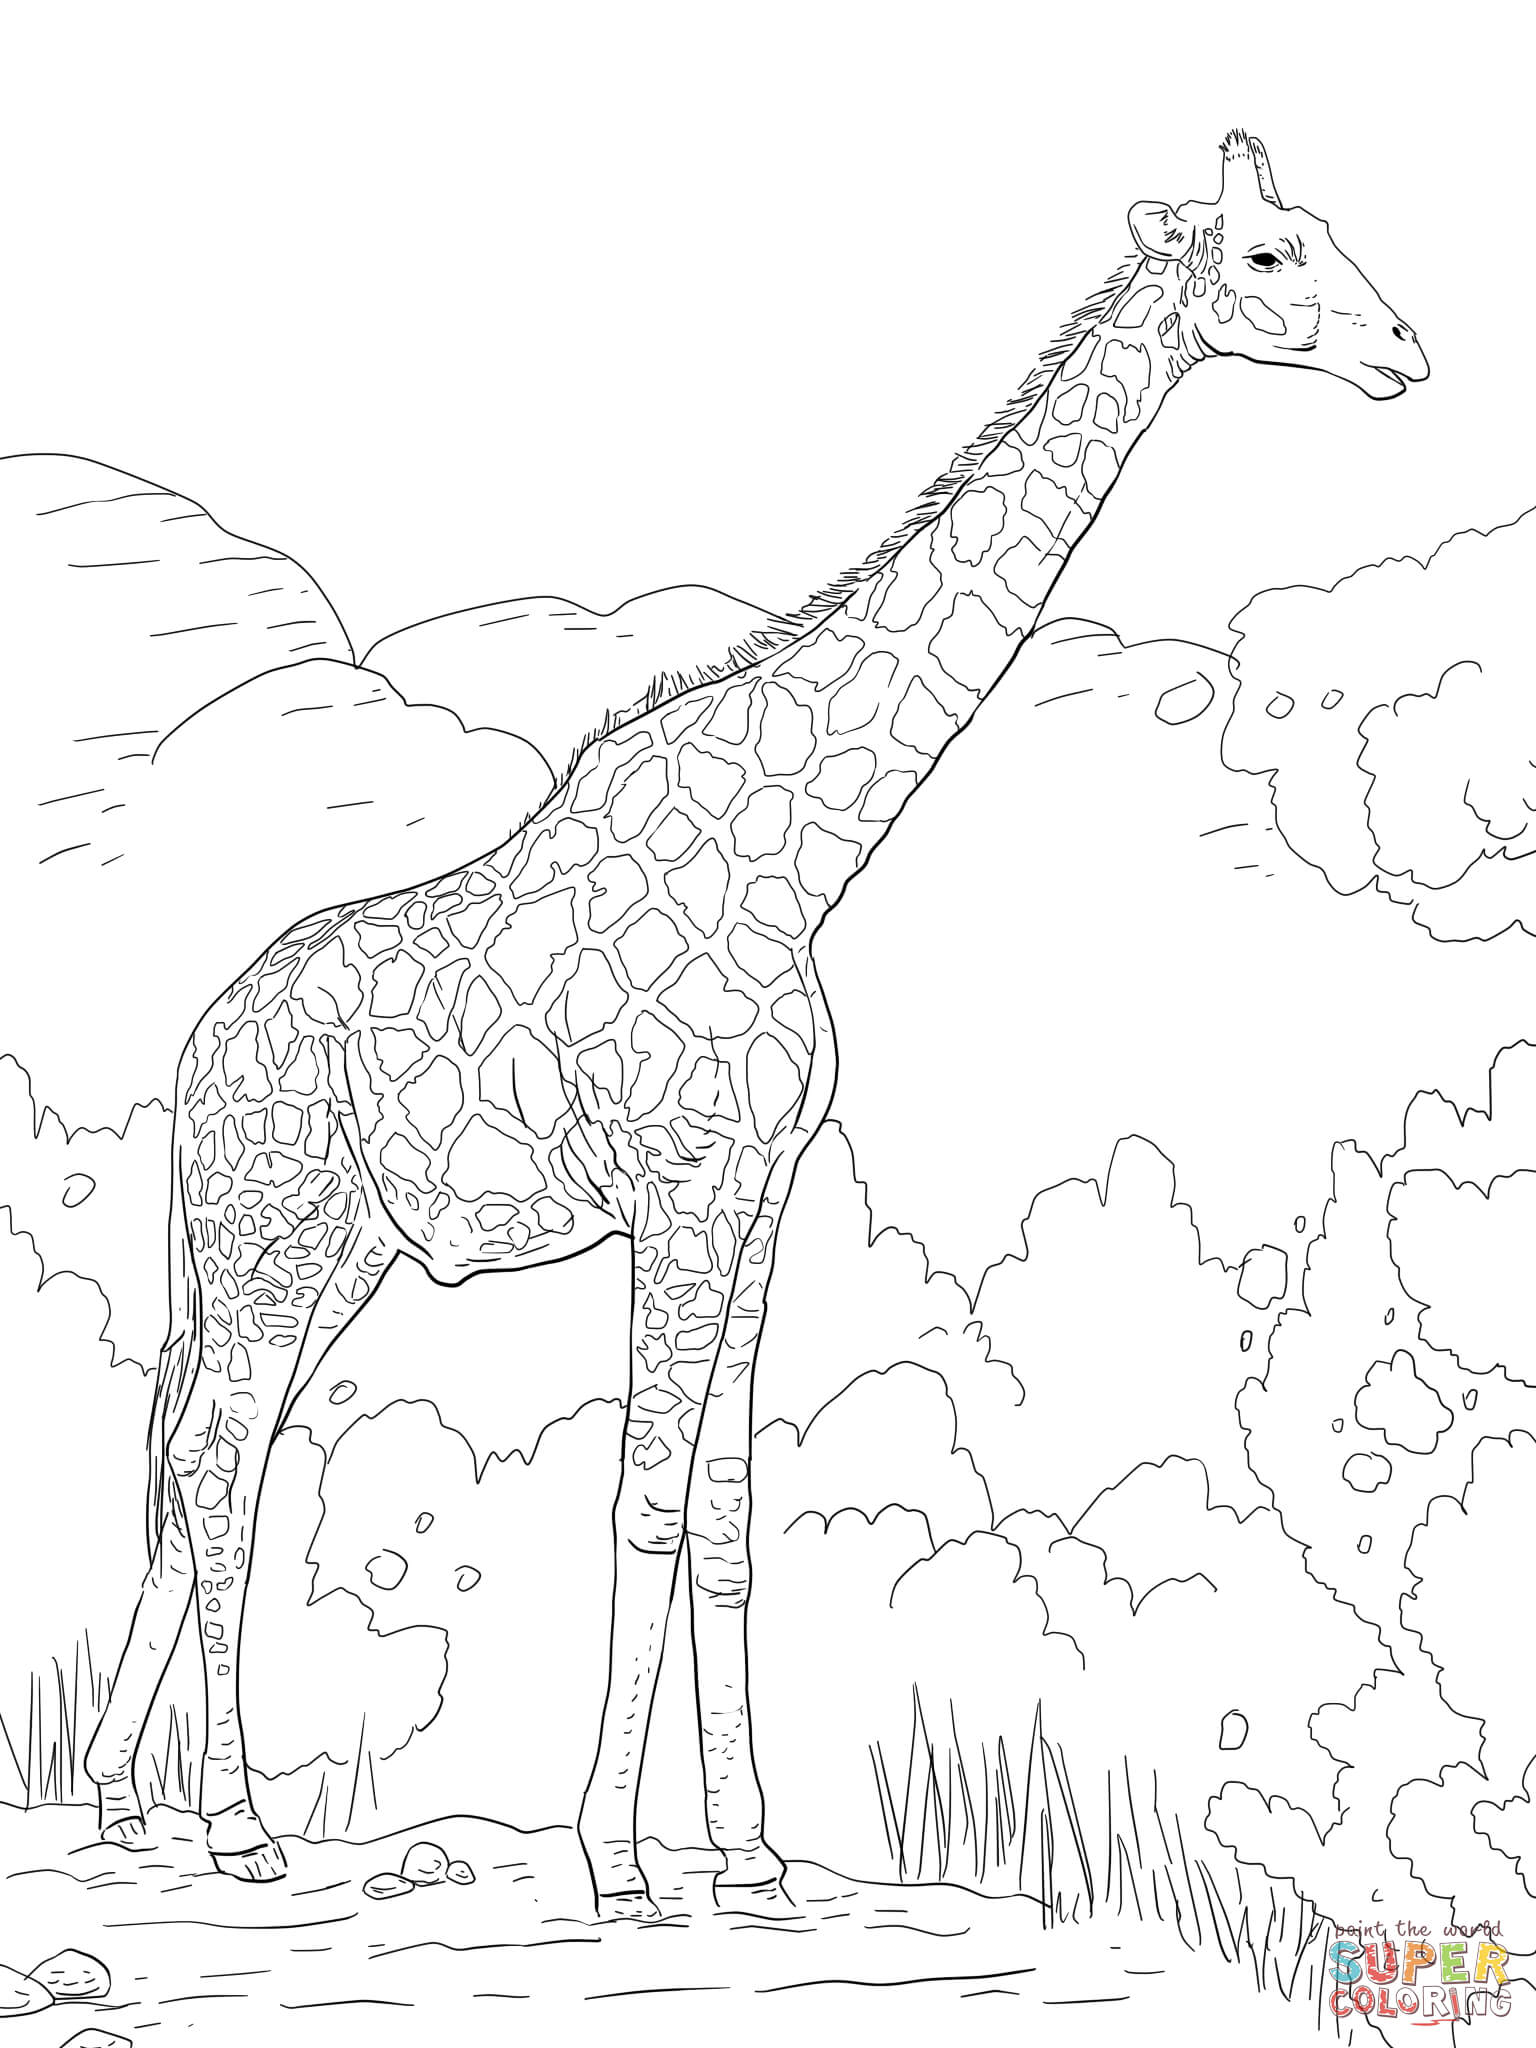 Giraffes coloring pages | Free Coloring Pages